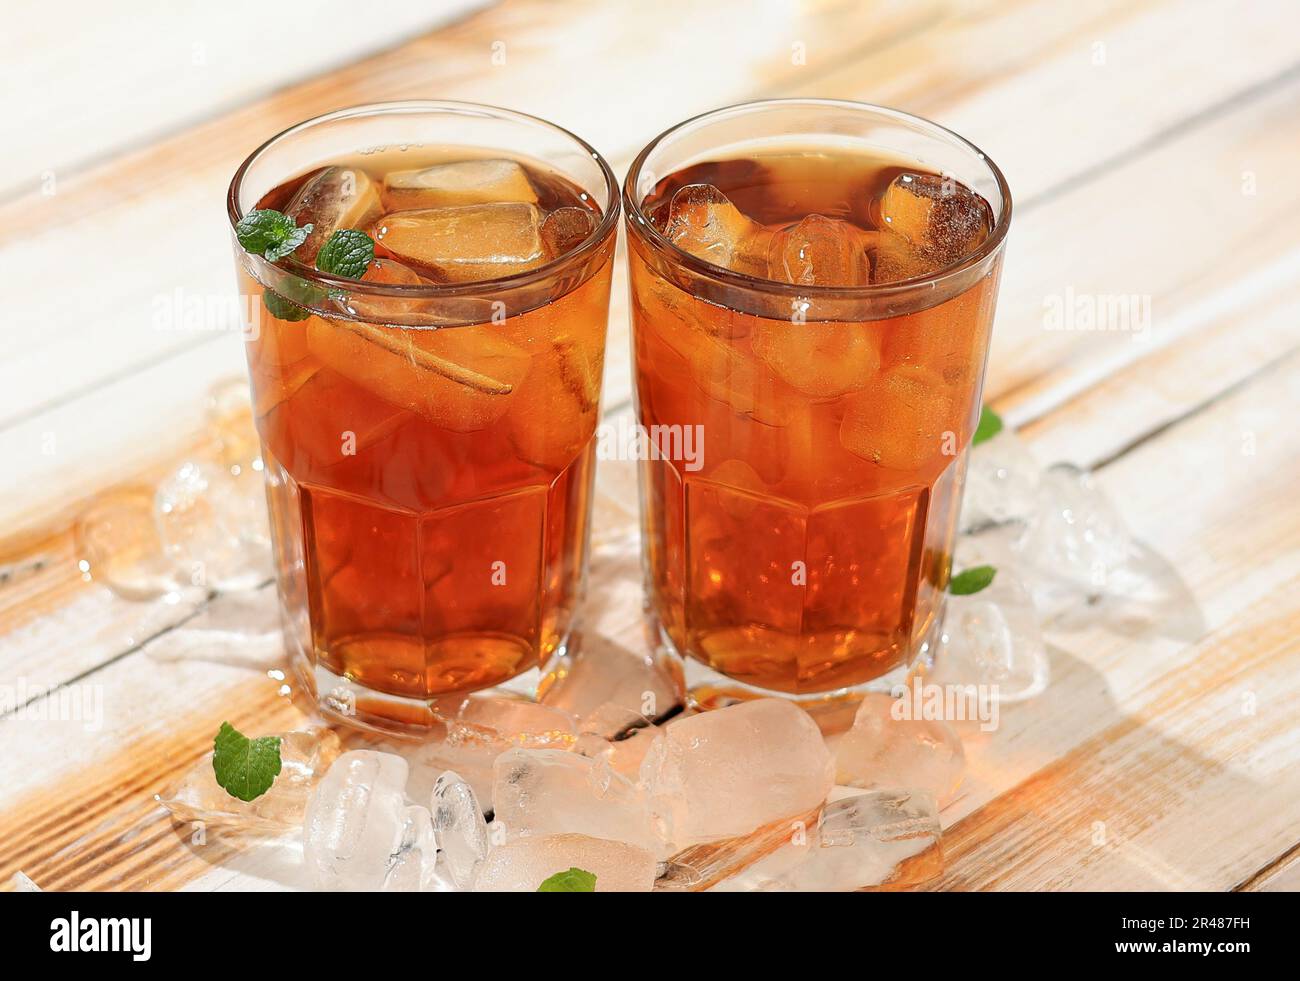 Two Glass Sweet Cold Ice Tea or Es Teh Manis on Wooden Table. Fresh Summer Drink Concept Stock Photo